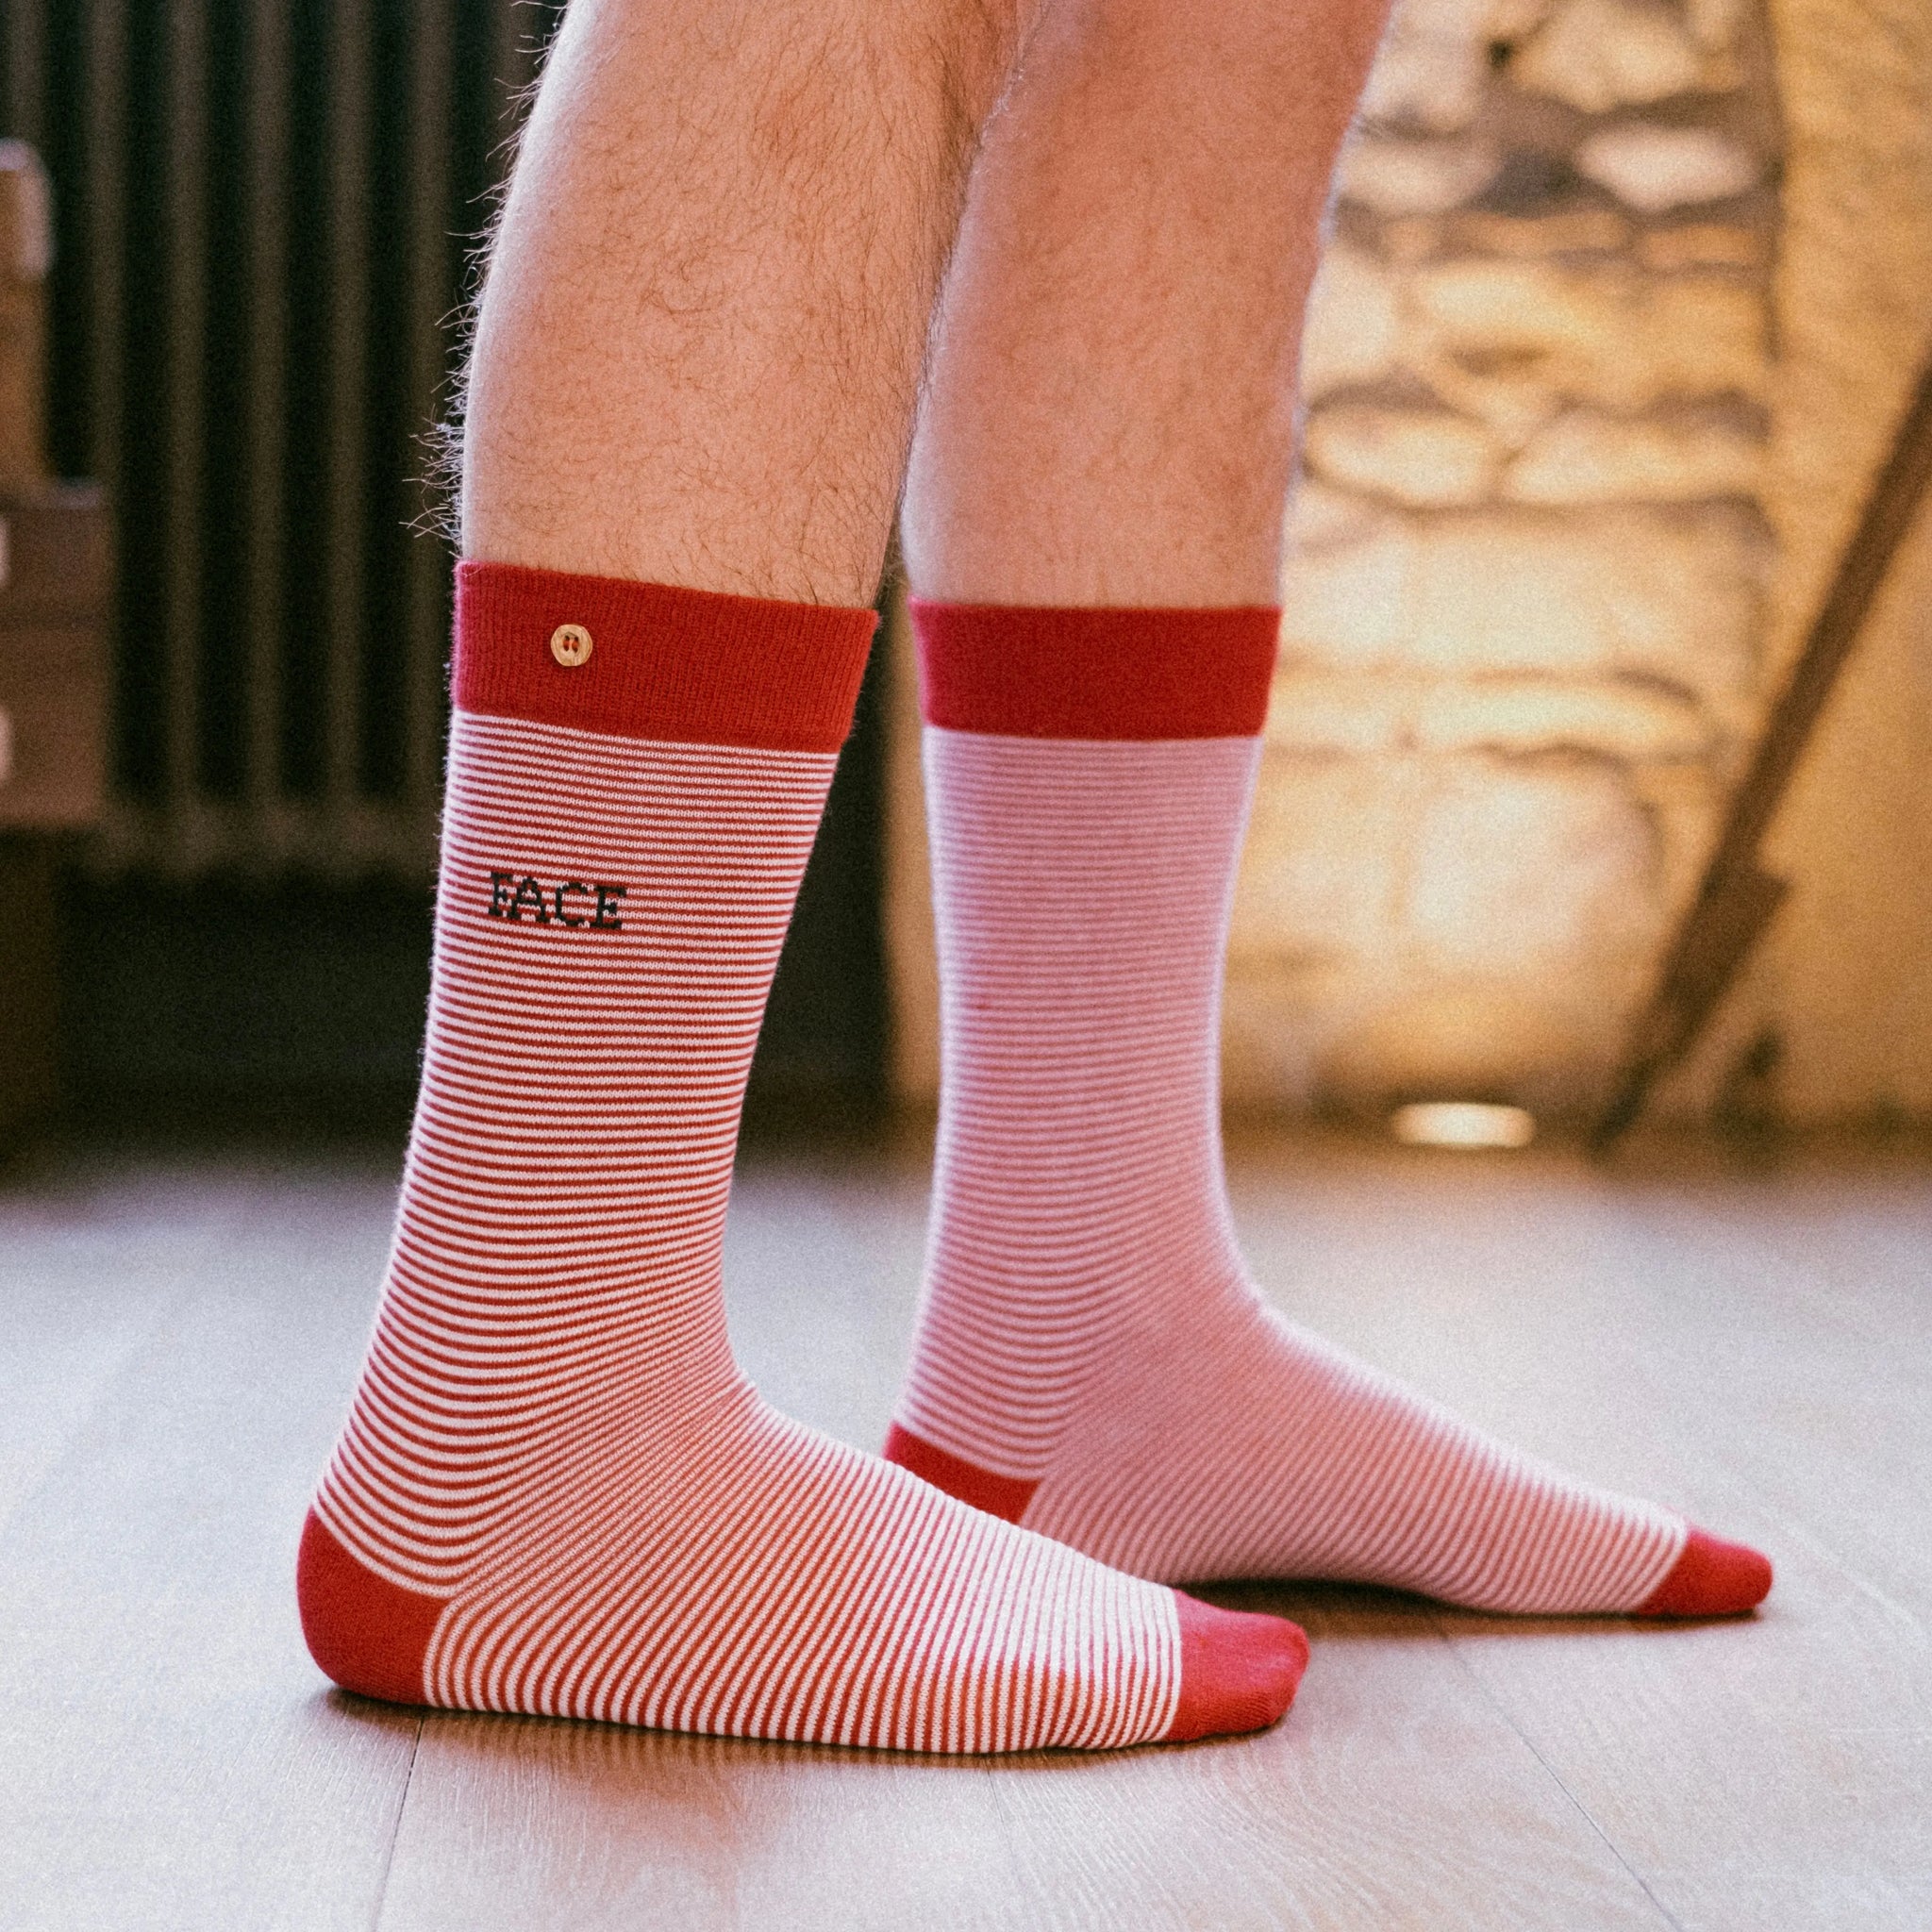 Les Inspirantes - Chaussettes Made in France - Pile ou Face France